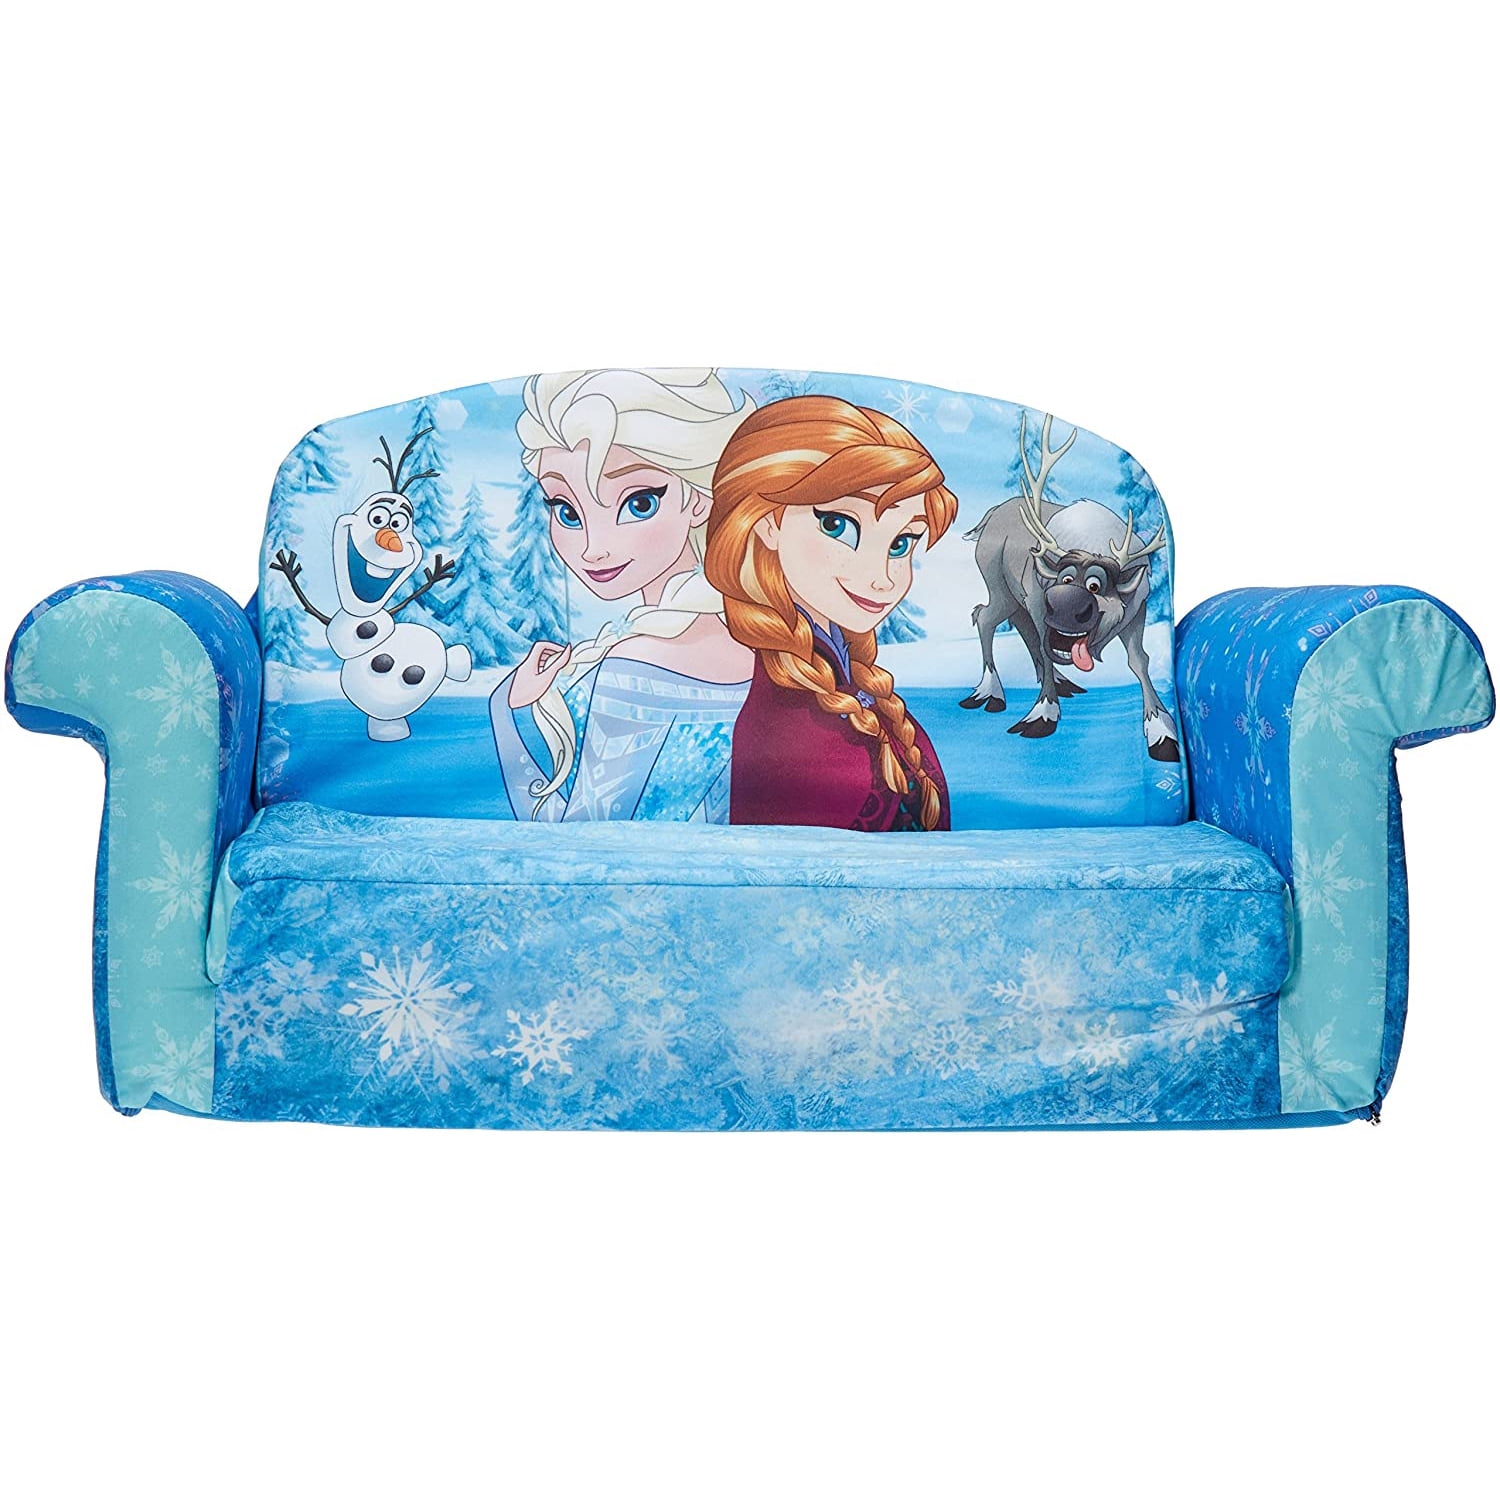 Disney’s The Lion King Childrens 2-in-1 Flip Open Foam Sofa Marshmallow Furniture by Spin Master 